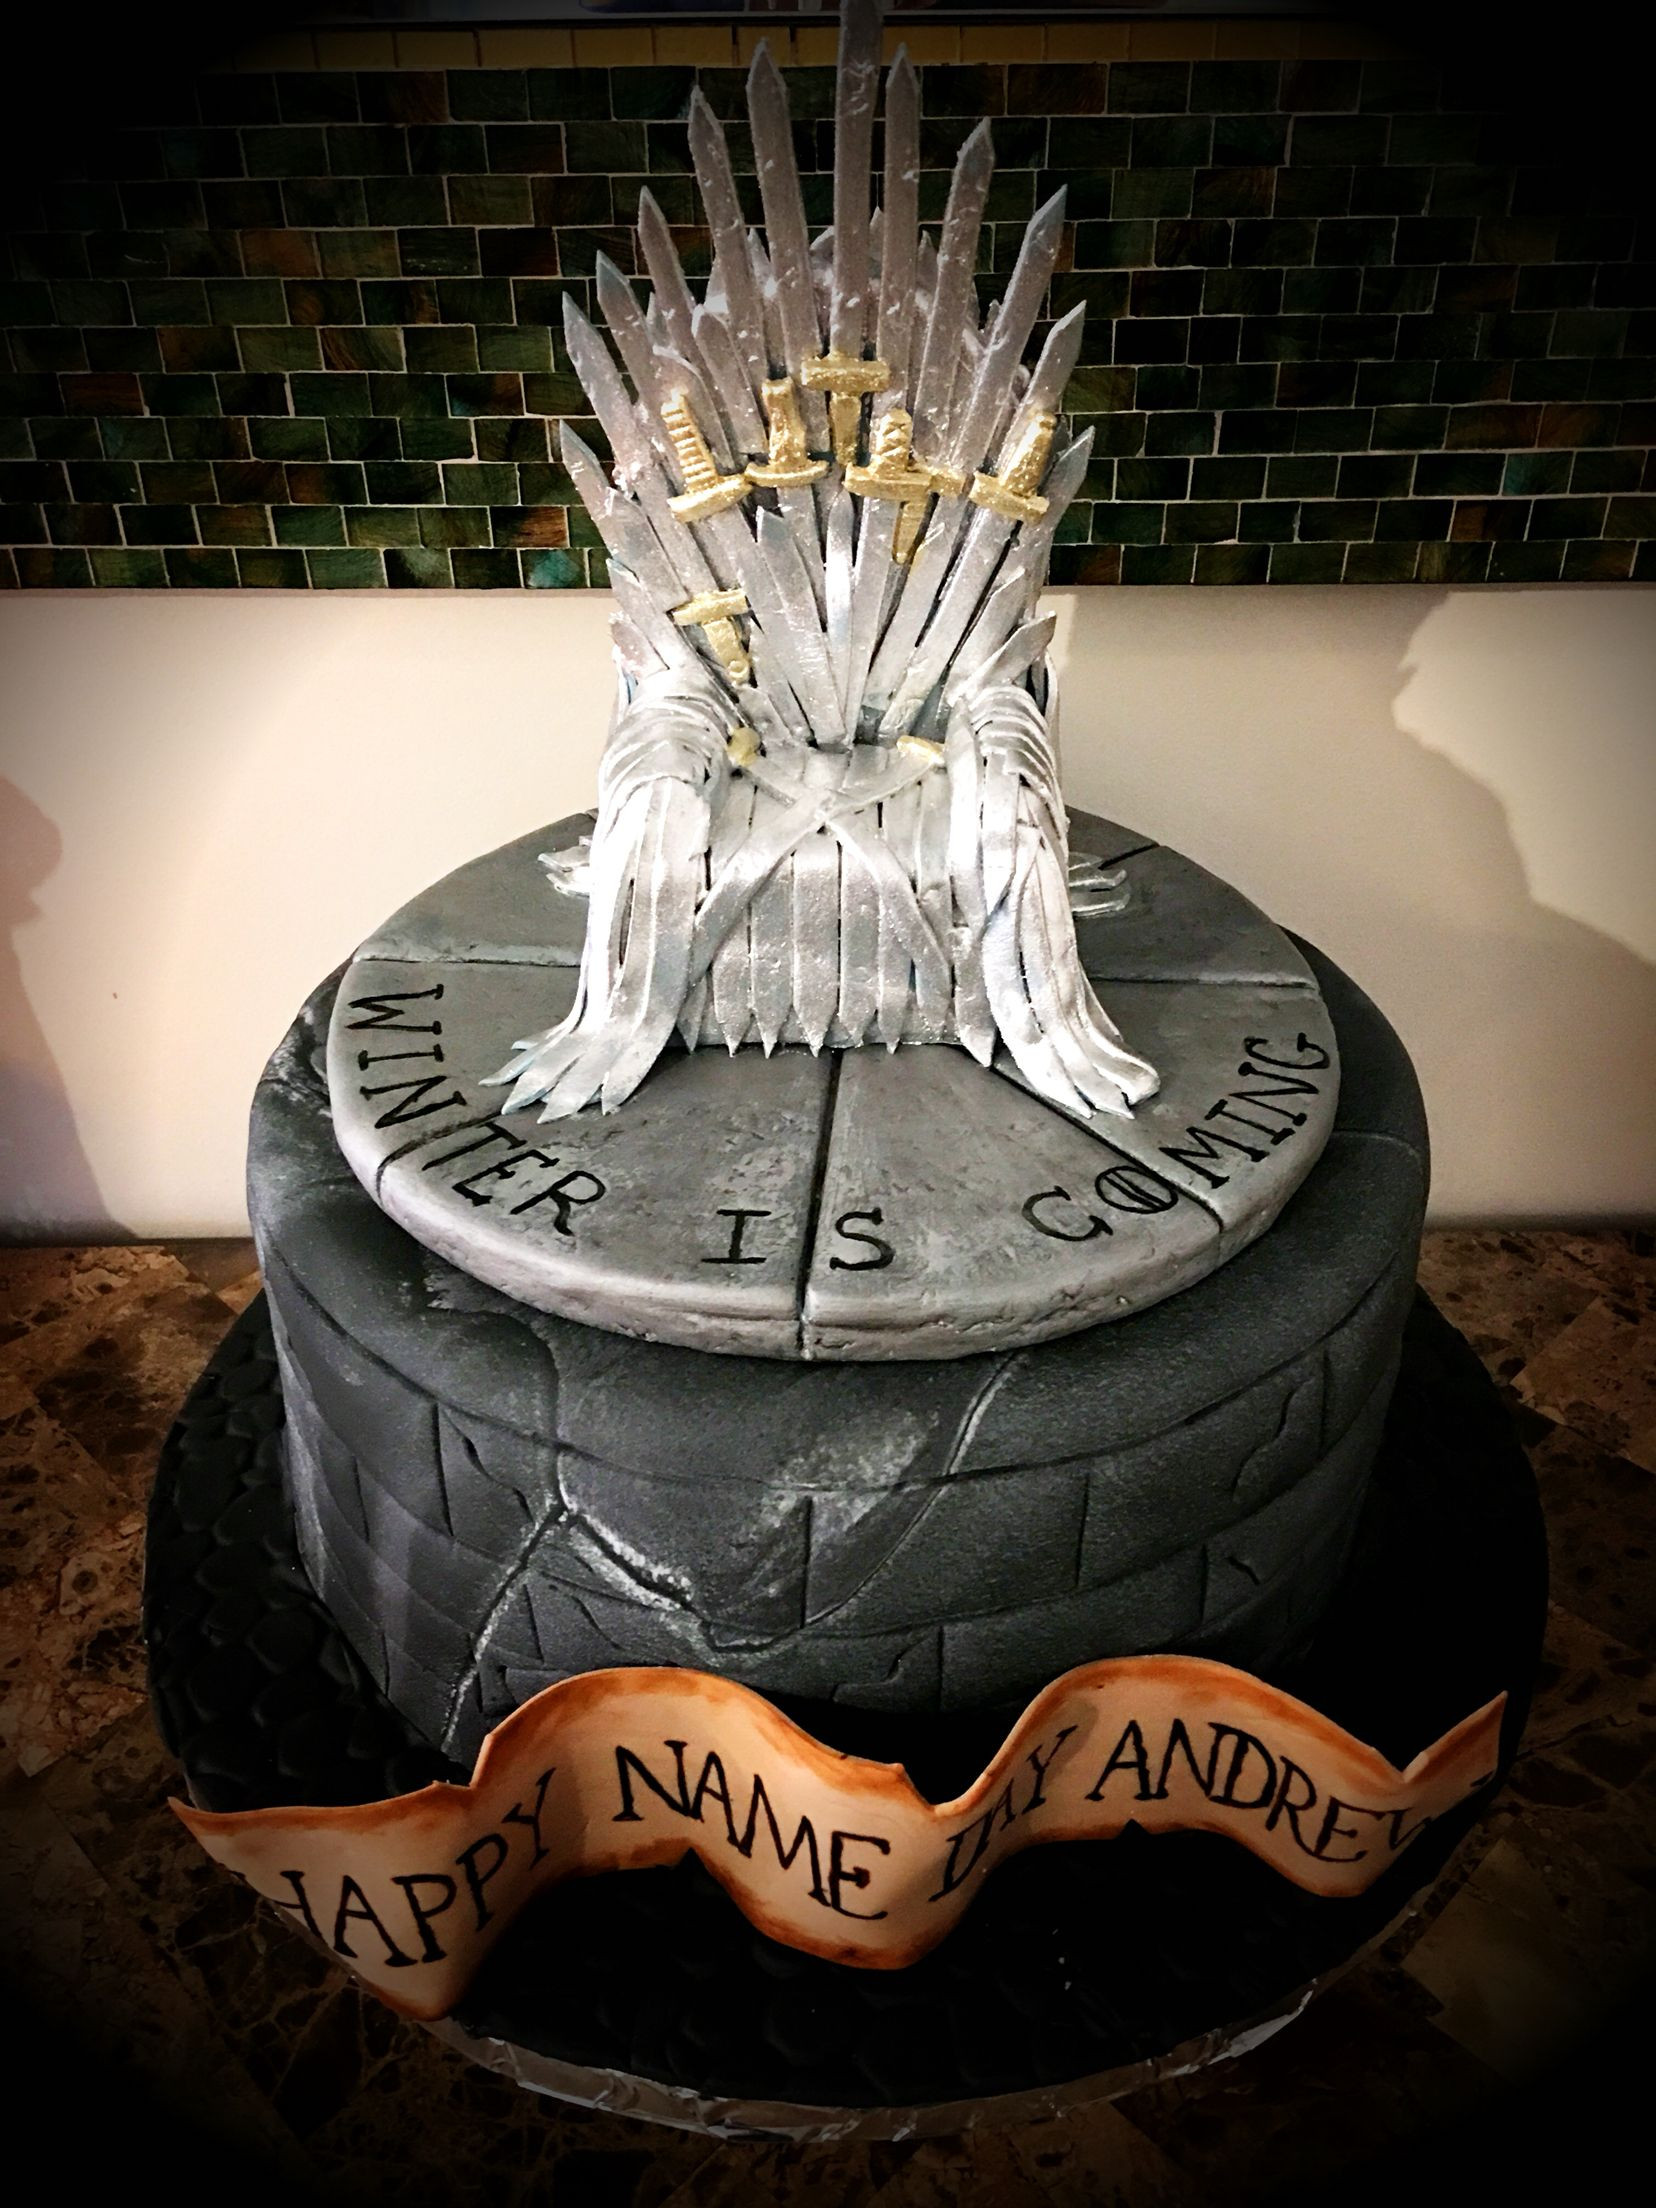 Game Of Thrones Birthday Cake
 Game of Thrones cake